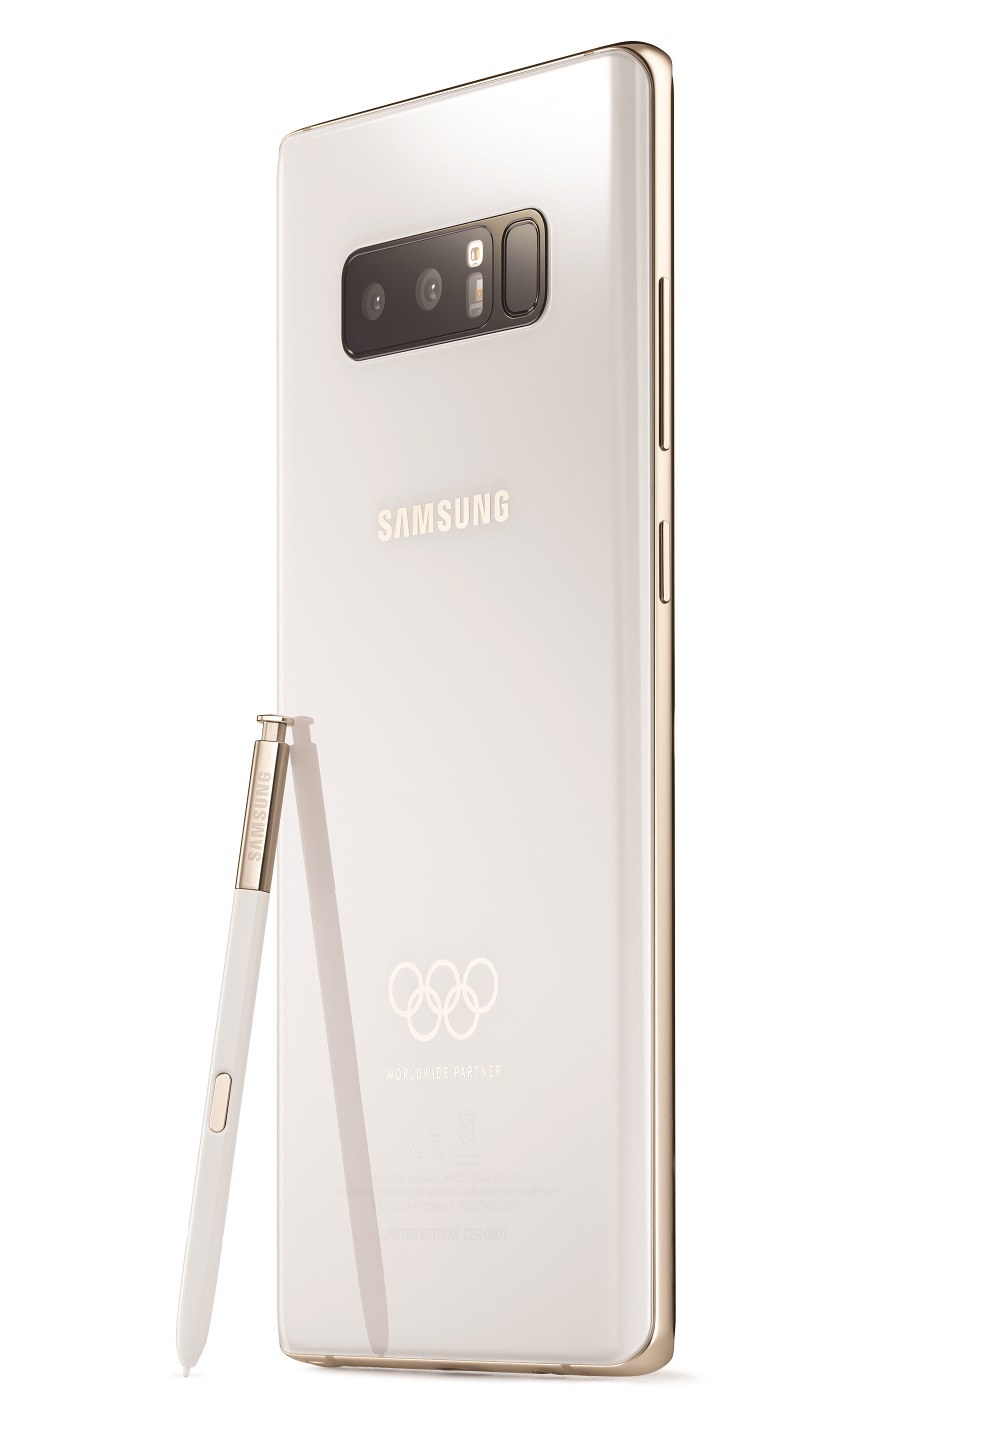 Galaxy-Note8-PyeongChang-2018-Olympic-Games-Limited-Edition-3.jpg